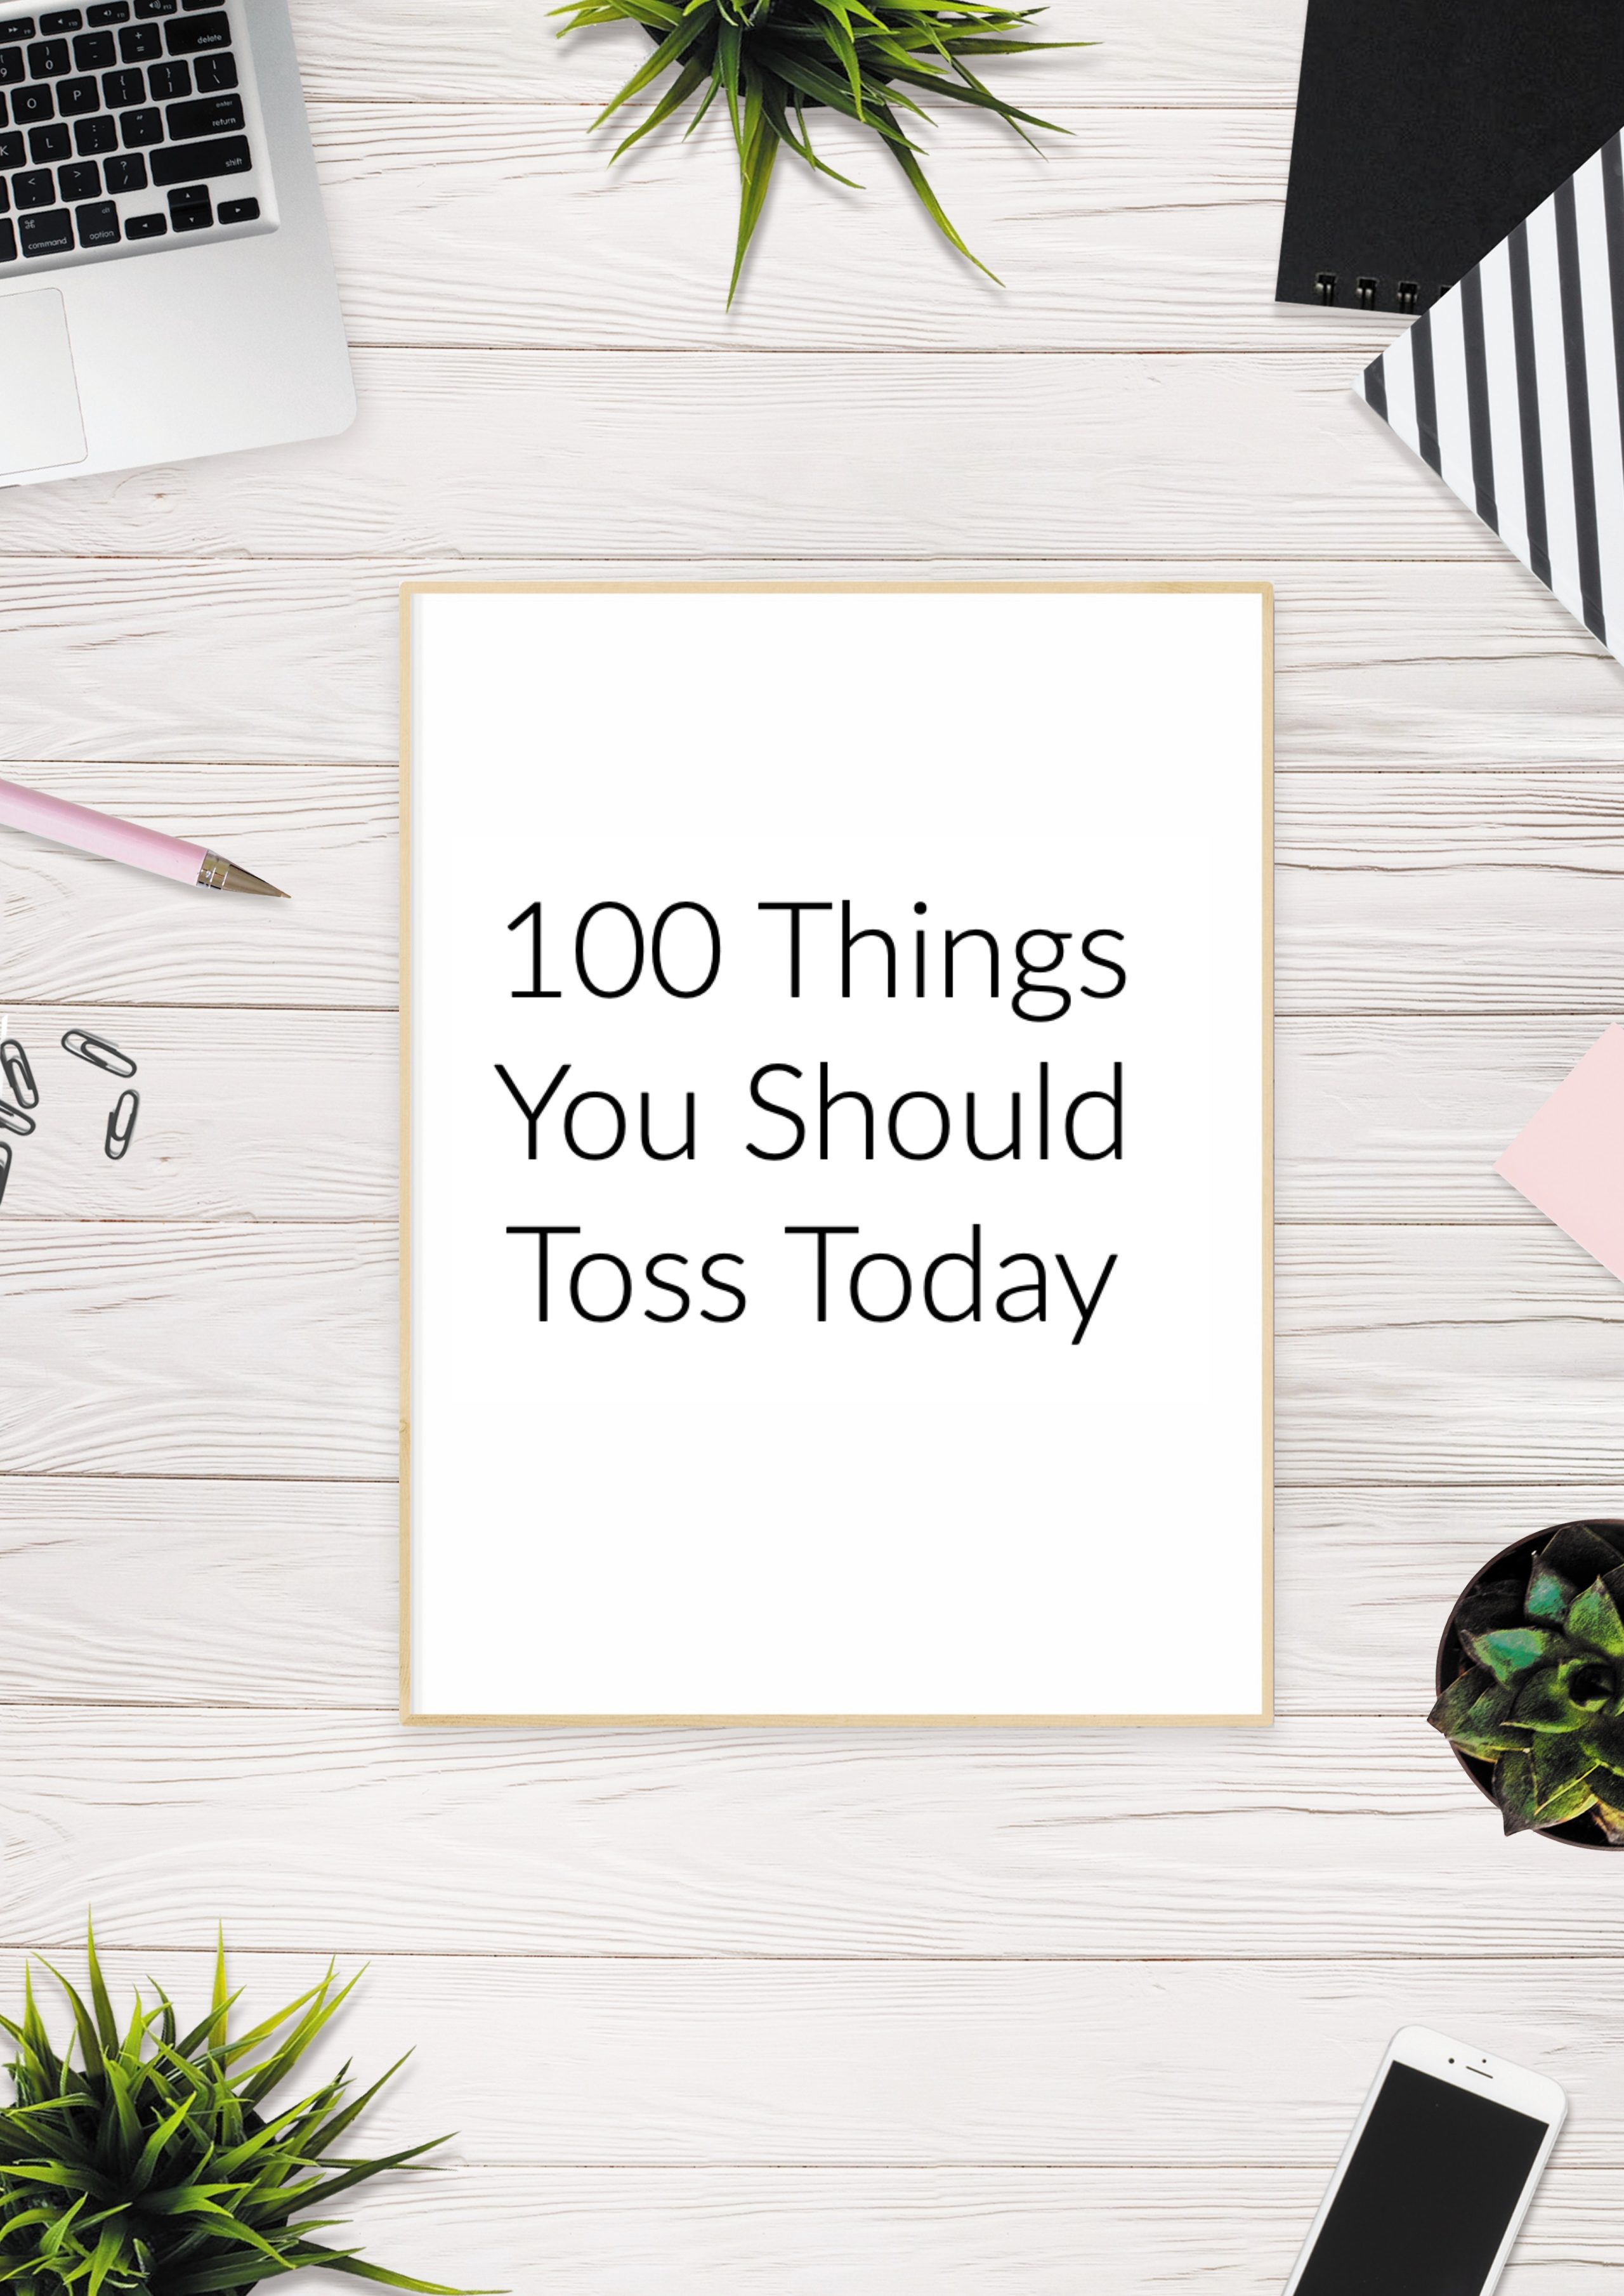 Toss these 100 Things to declutter your life